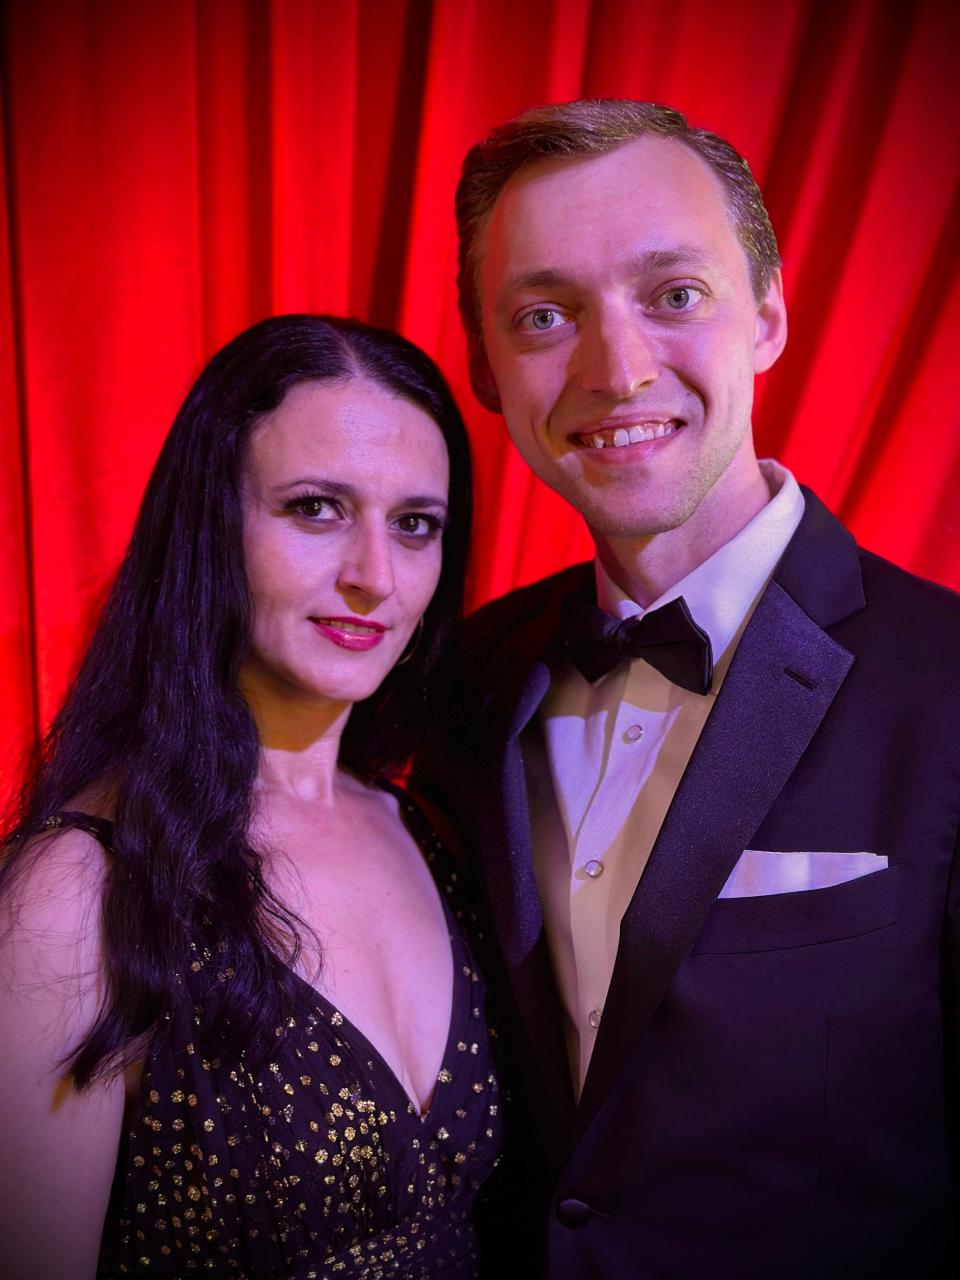 Iryna Savushkina and Roman Doroshenko, dance champs from Ukraine, say dancing could be a fountain of youth. "When you dance, you are young,” Iryna said.
(Credit:   CONTRIBUTED by ROMAN DOROSHENKO)